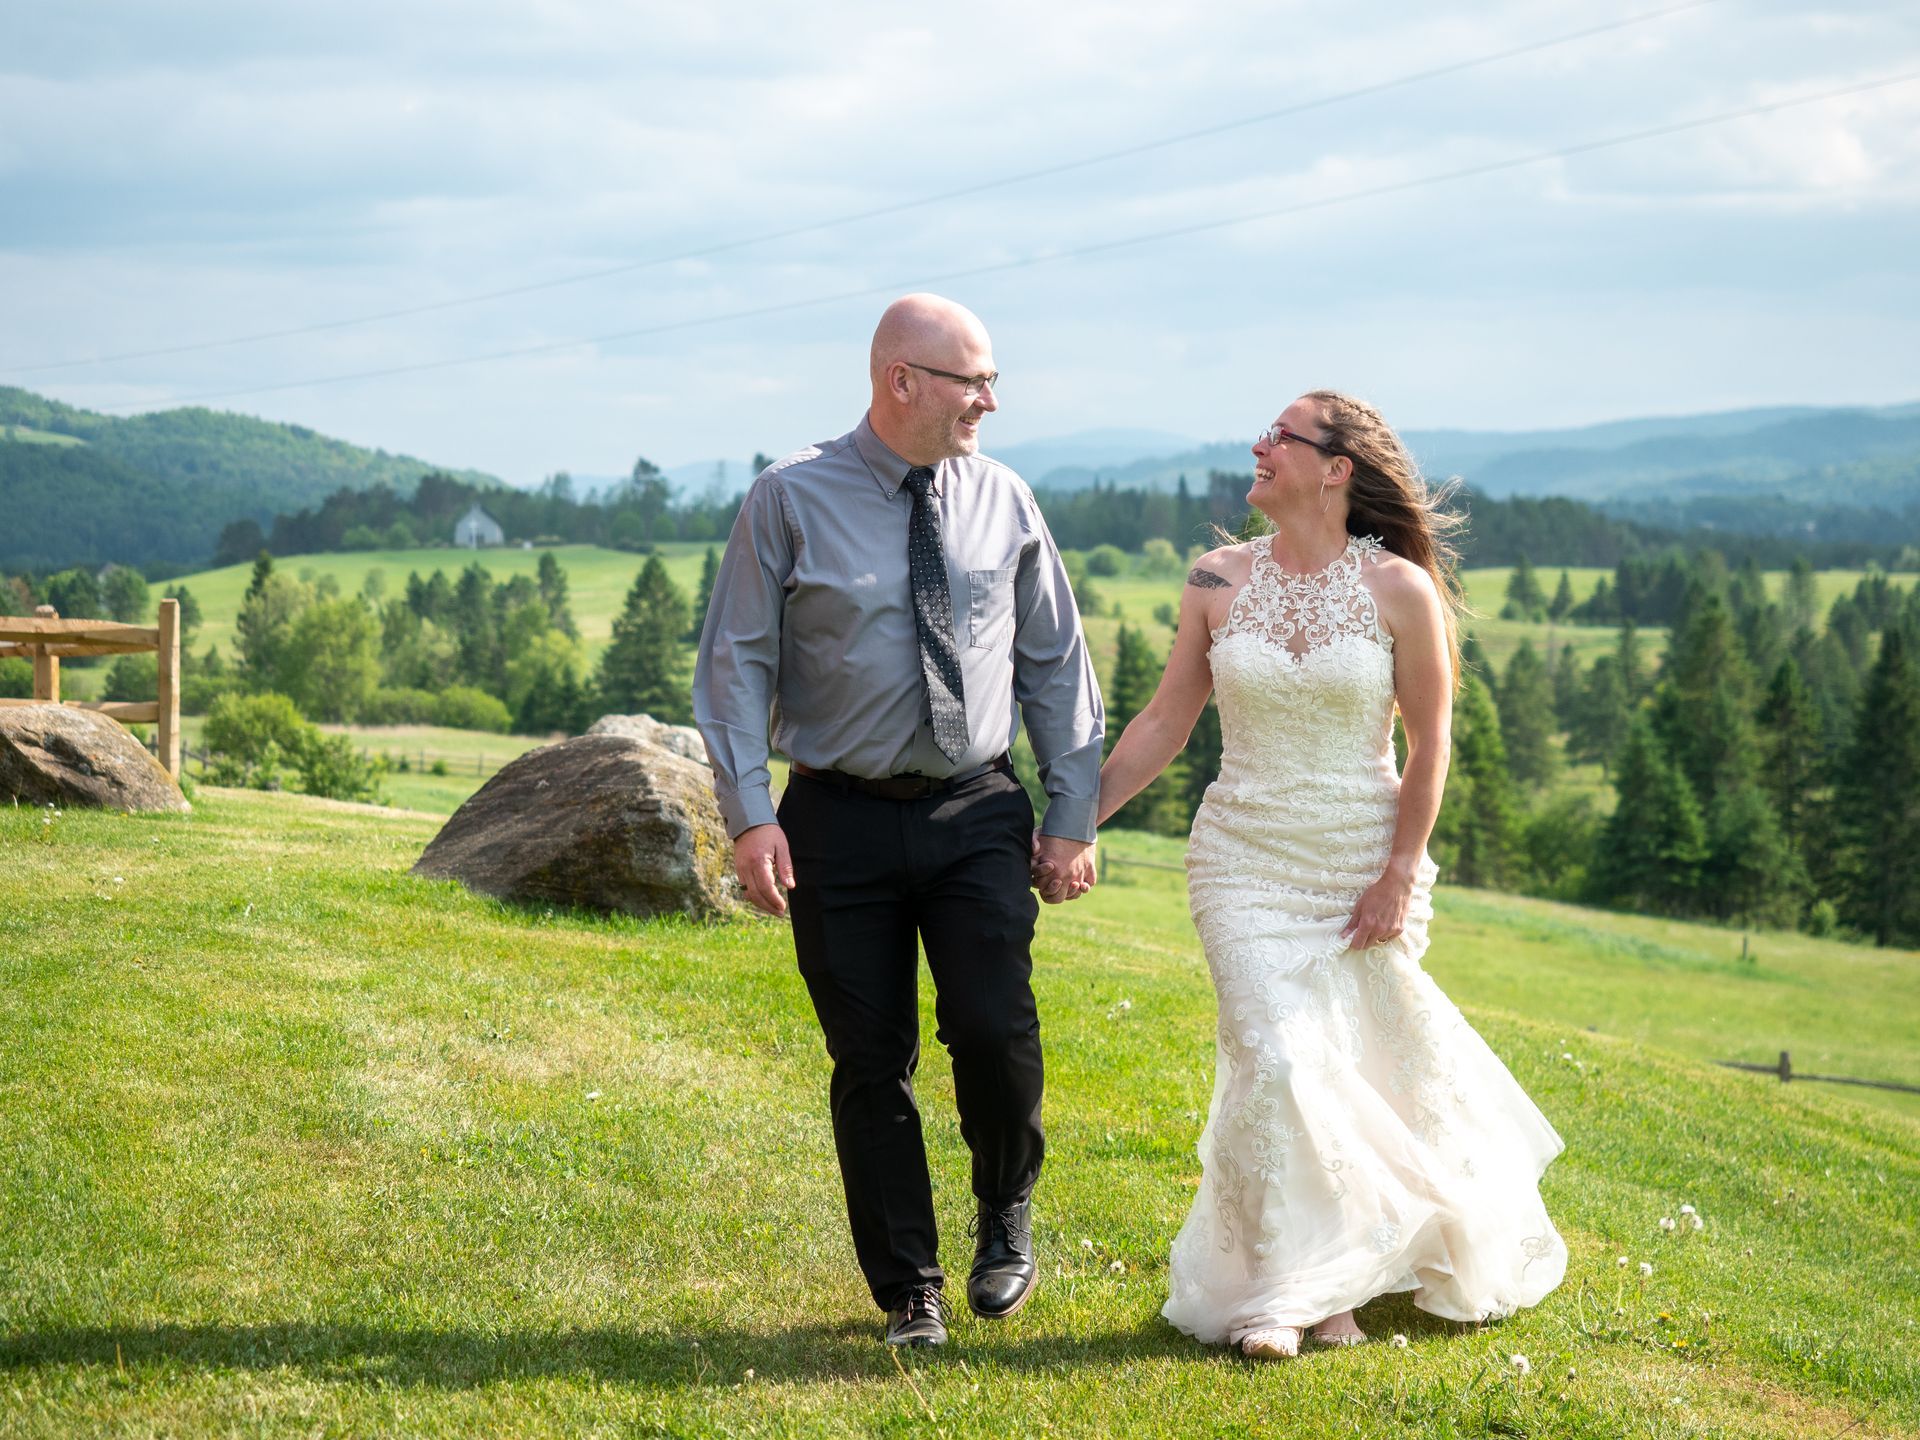 A newlywed couple walking holding hands in a field in Vermont